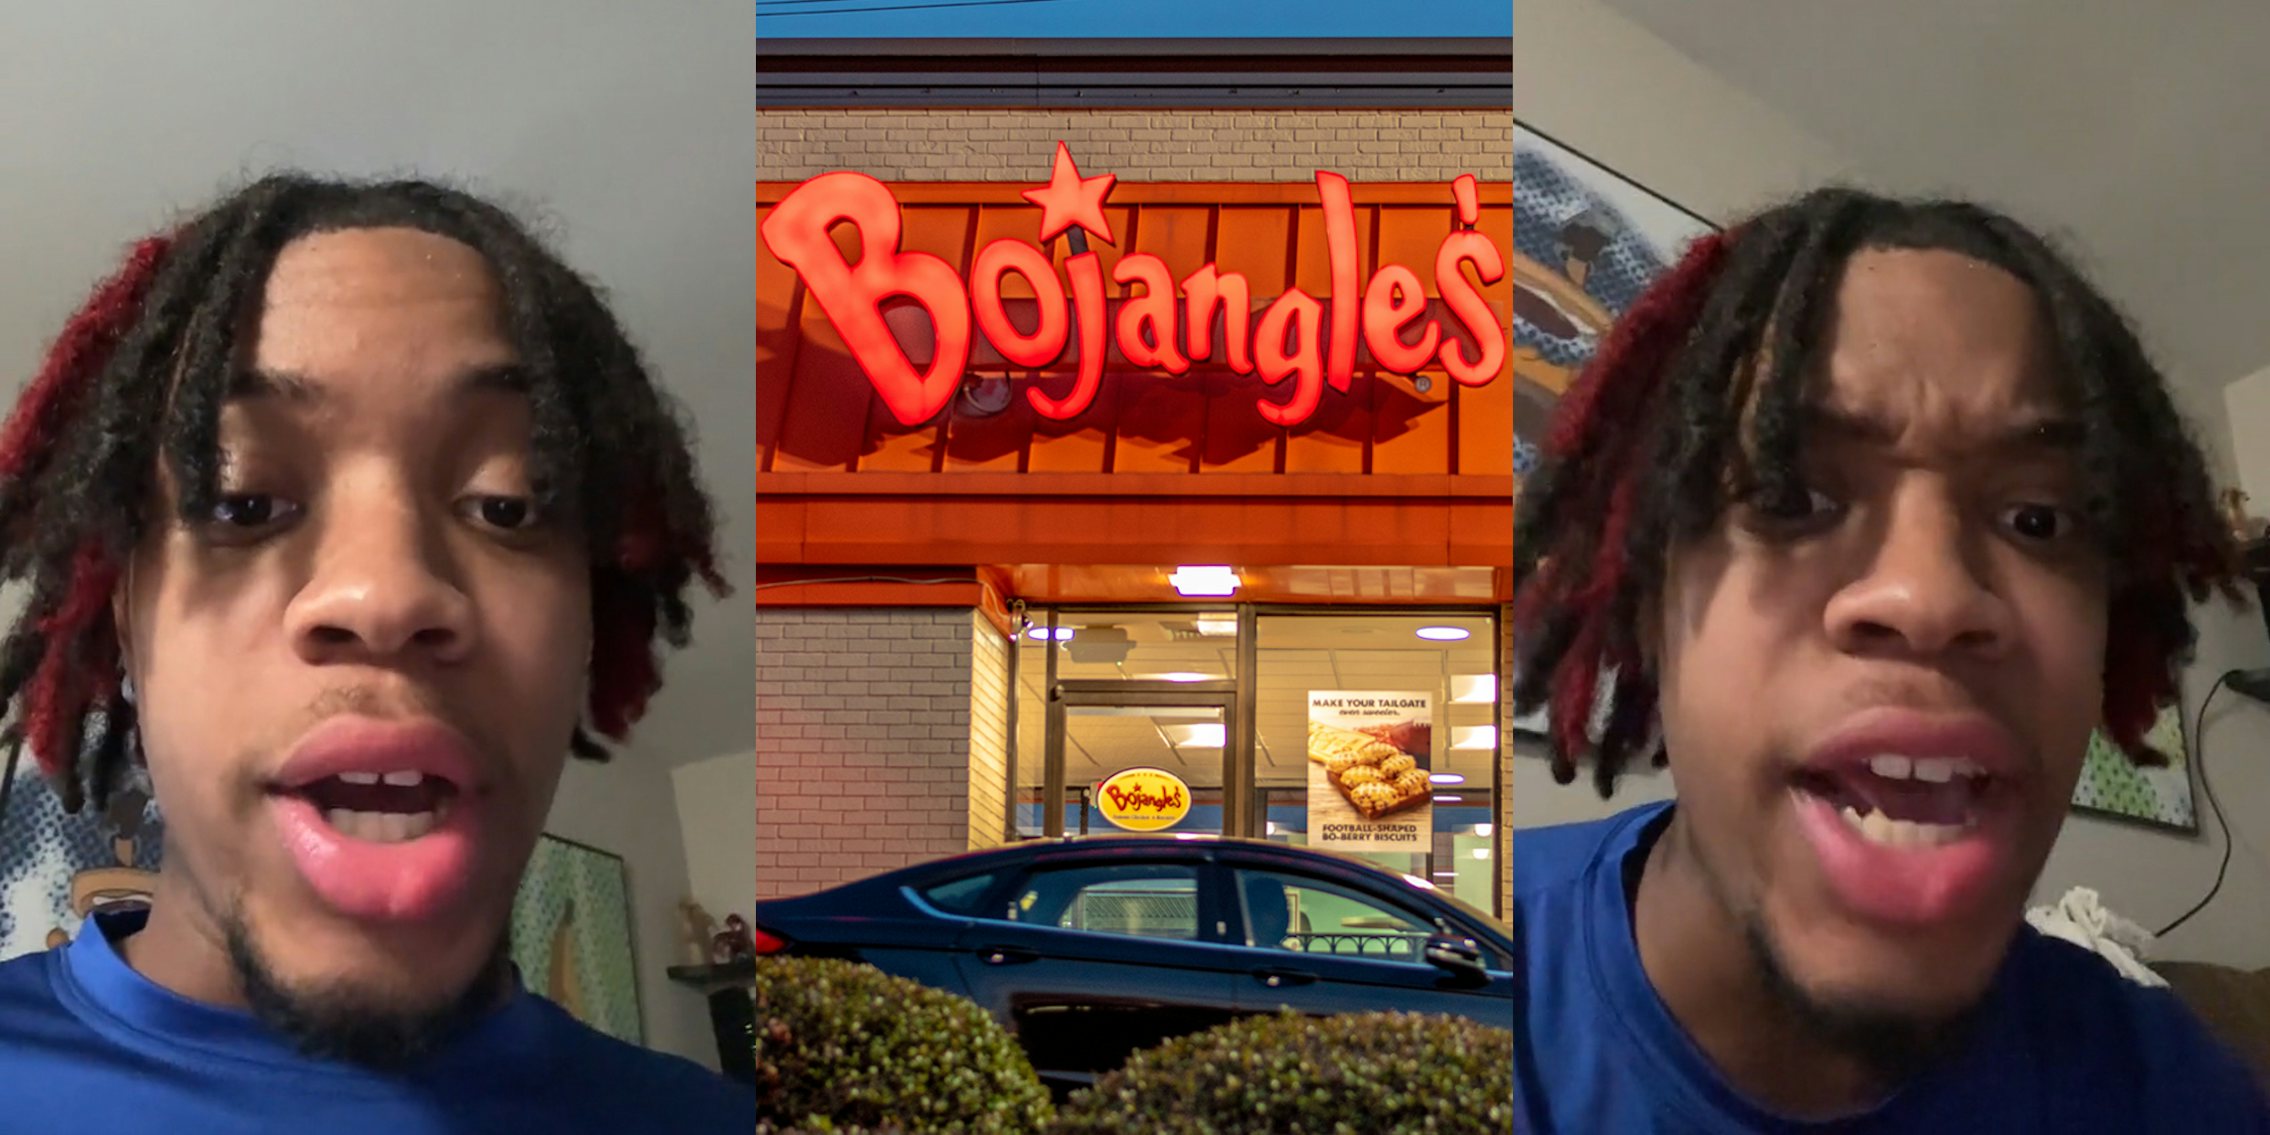 man speaking in front of white walls (l) Bojangles drive thru window with sign above (c) man speaking in front of white walls (r)